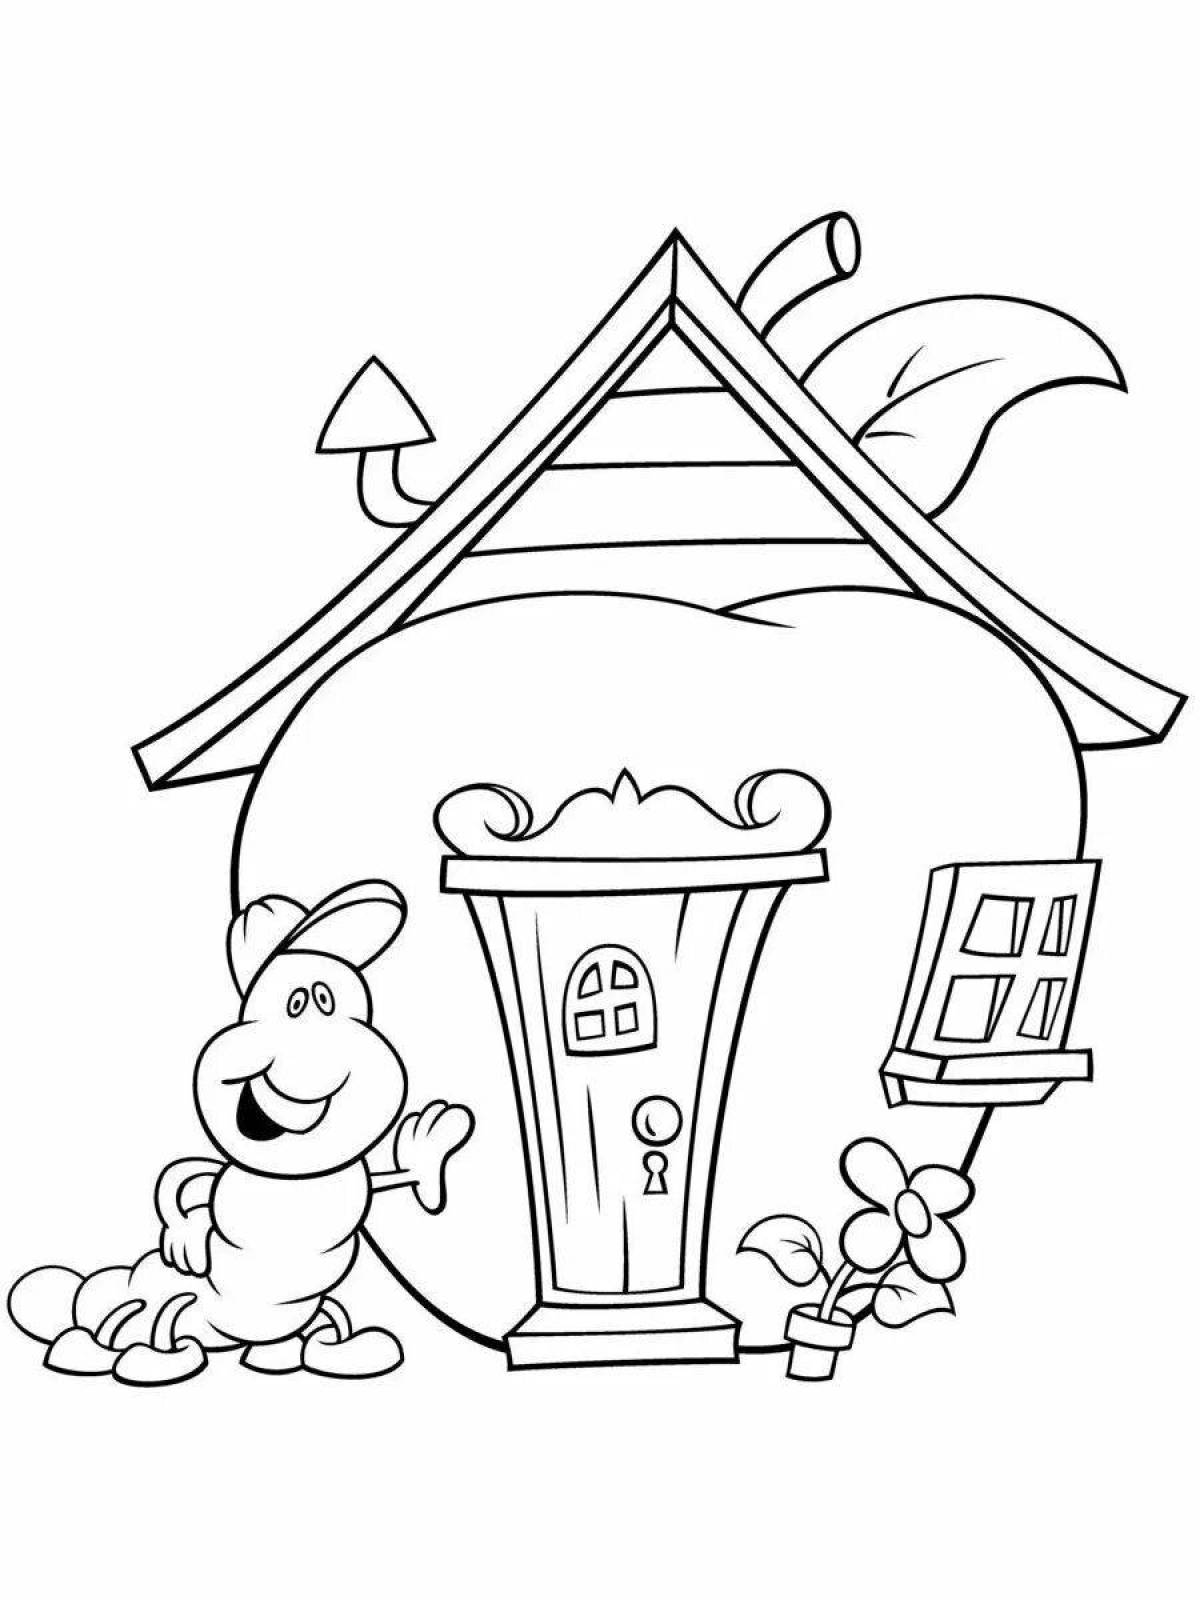 Dreamy magic house coloring book